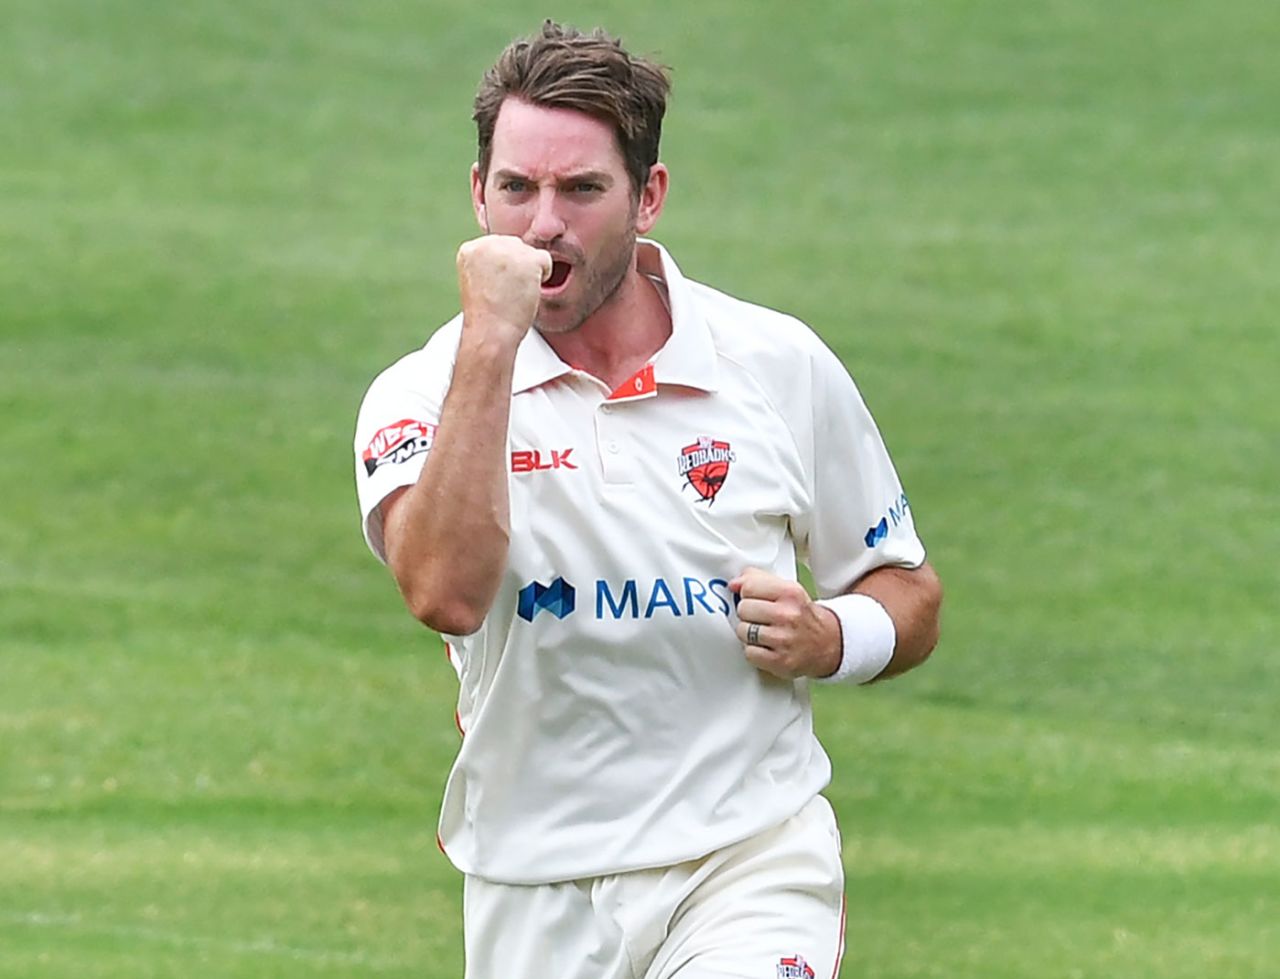 Chadd Sayers took out New South Wales' top order, South Australia v New South Wales, Sheffield Shield, Adelaide Oval, November 1, 2019